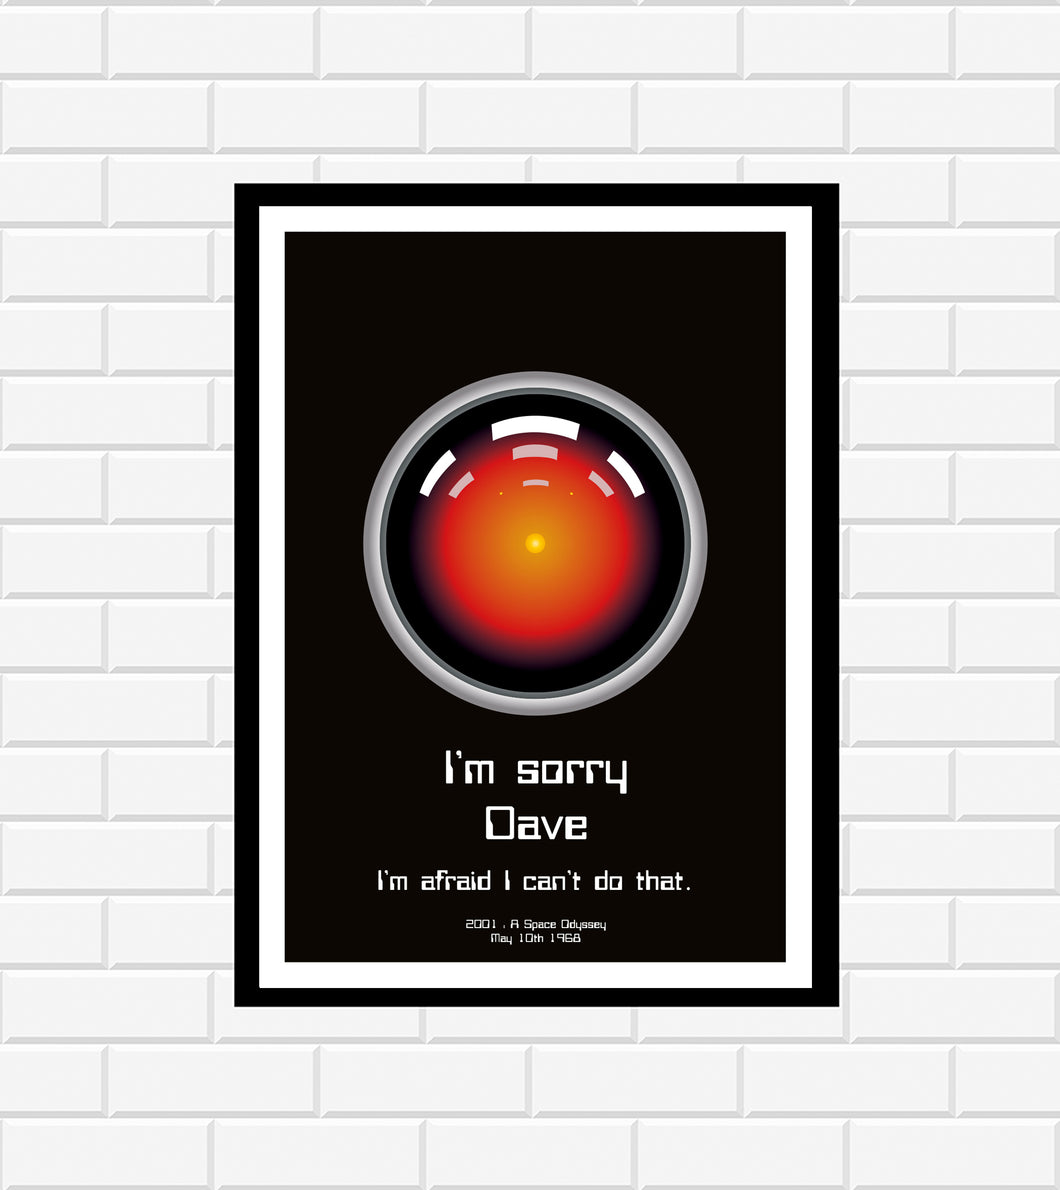 2001 : A Space Odyssey Poster